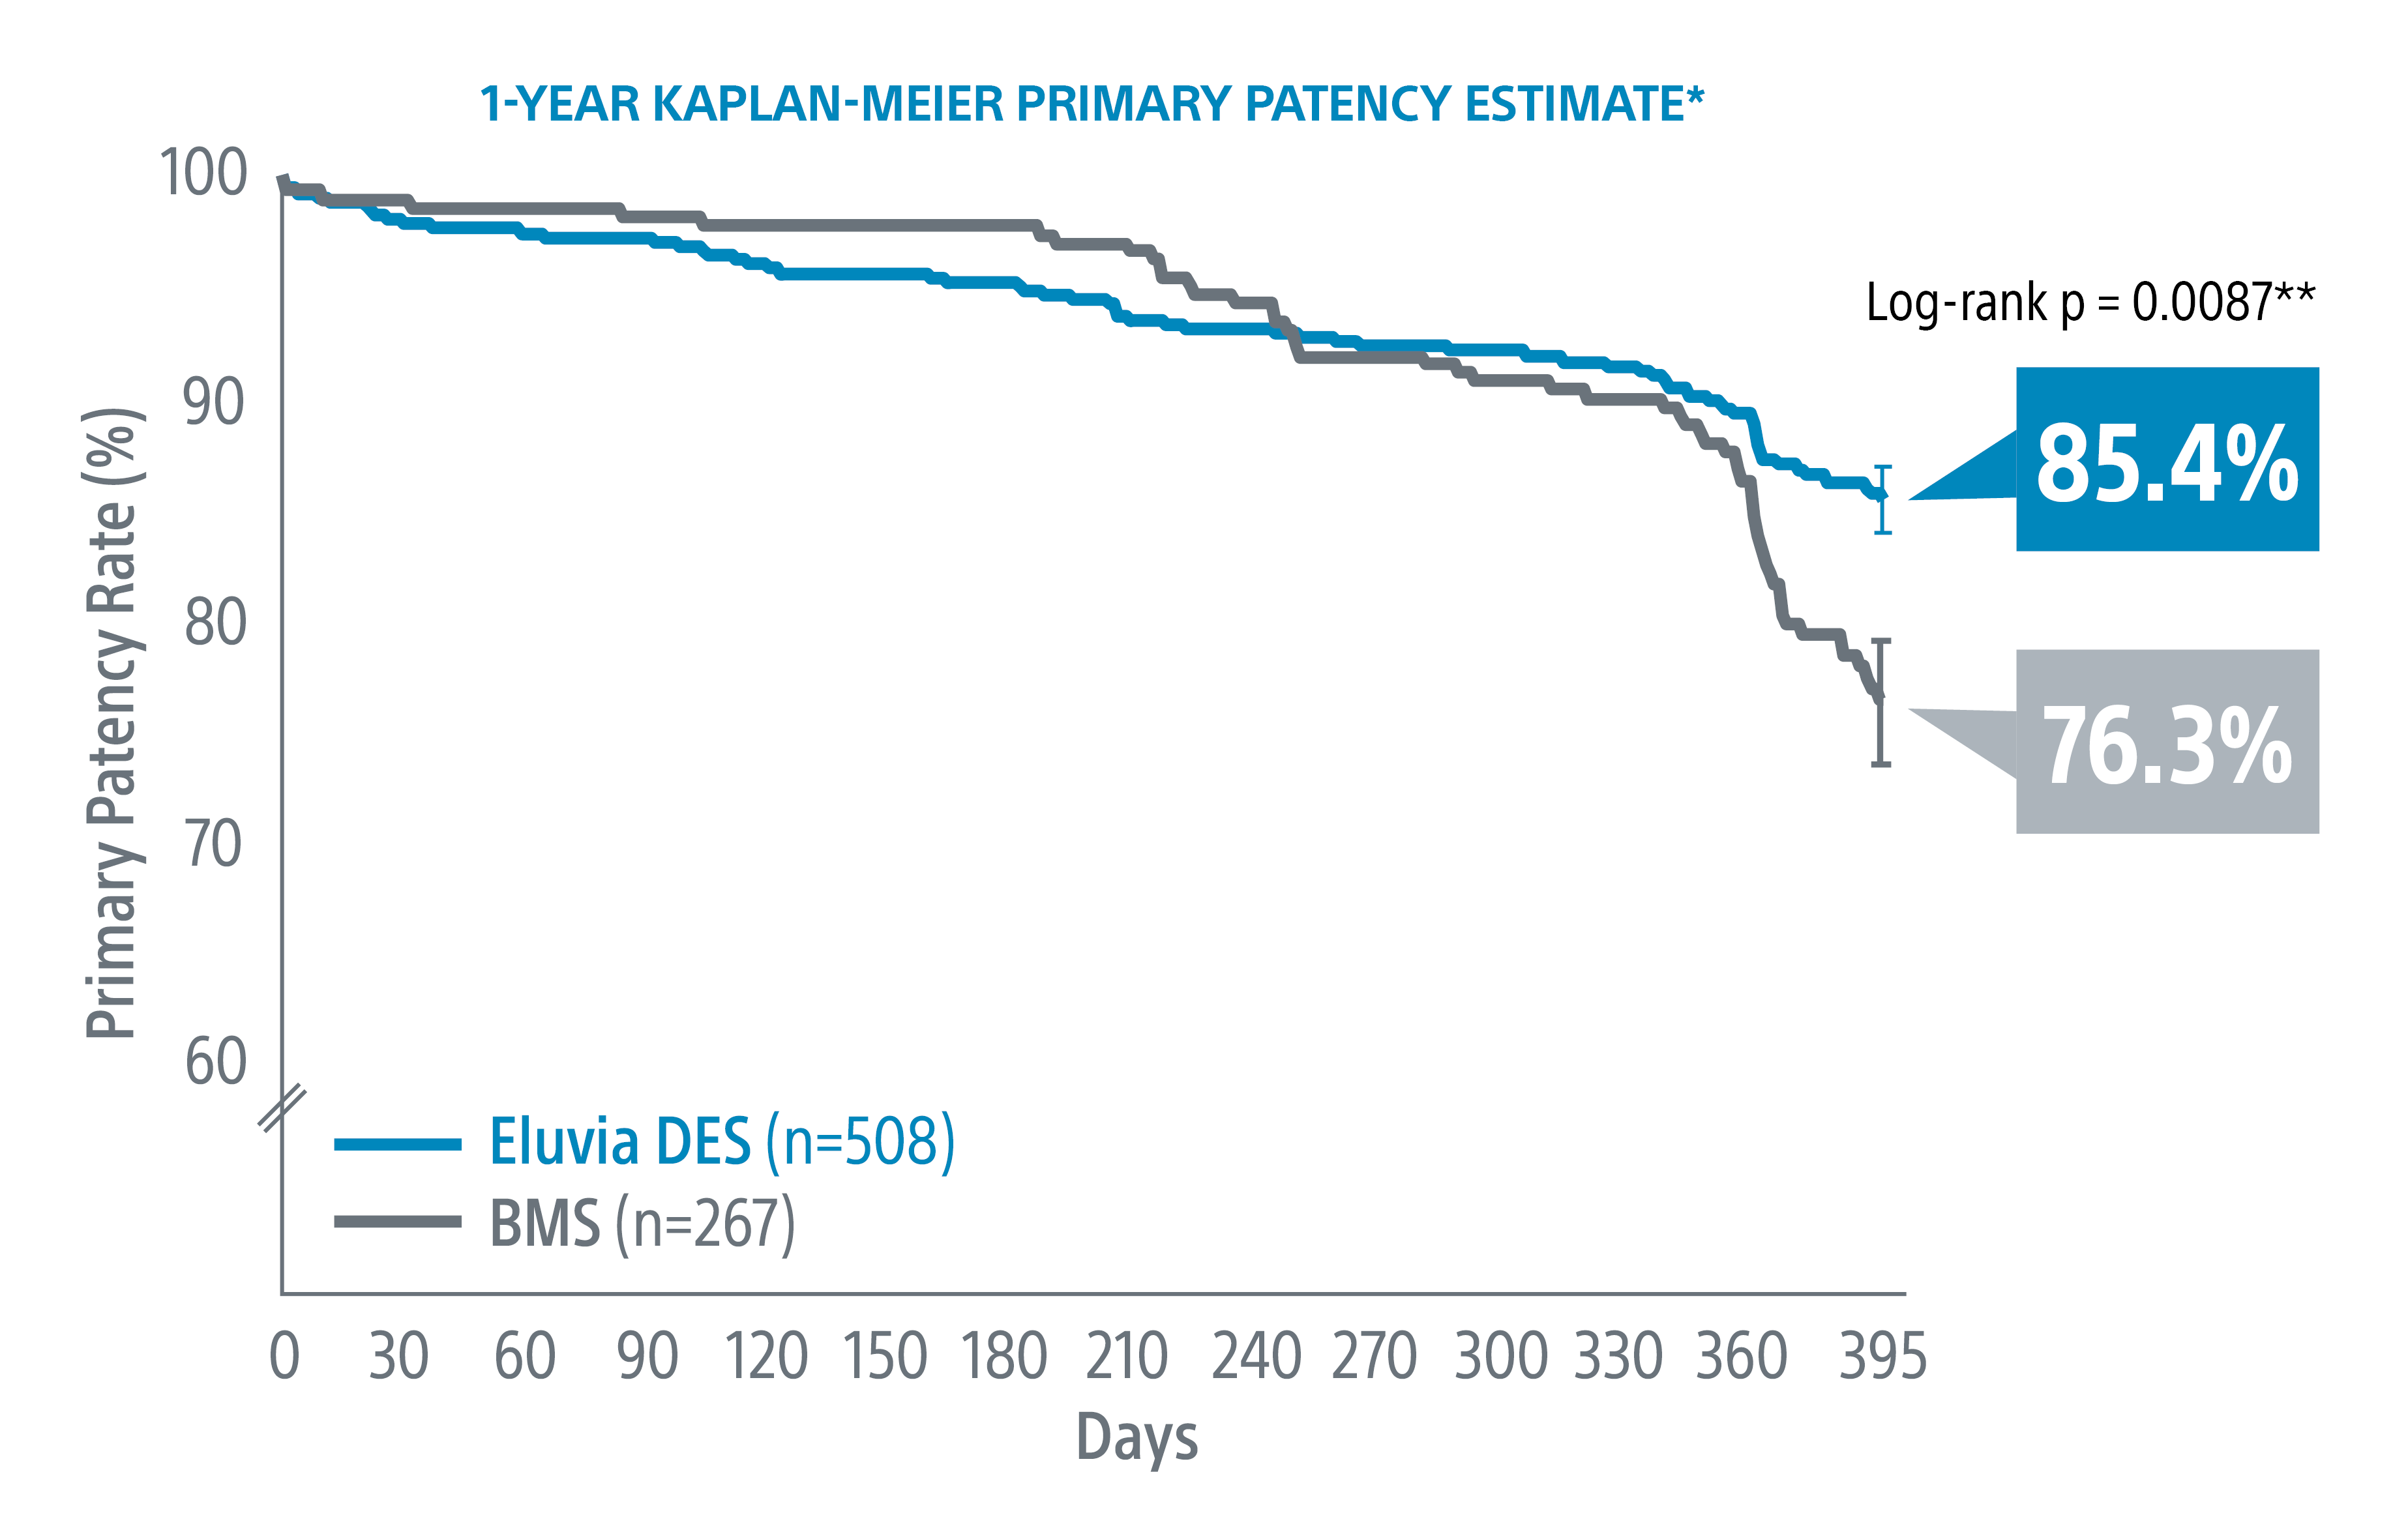 EMINENT RCT 1-Year Primary Patency Results